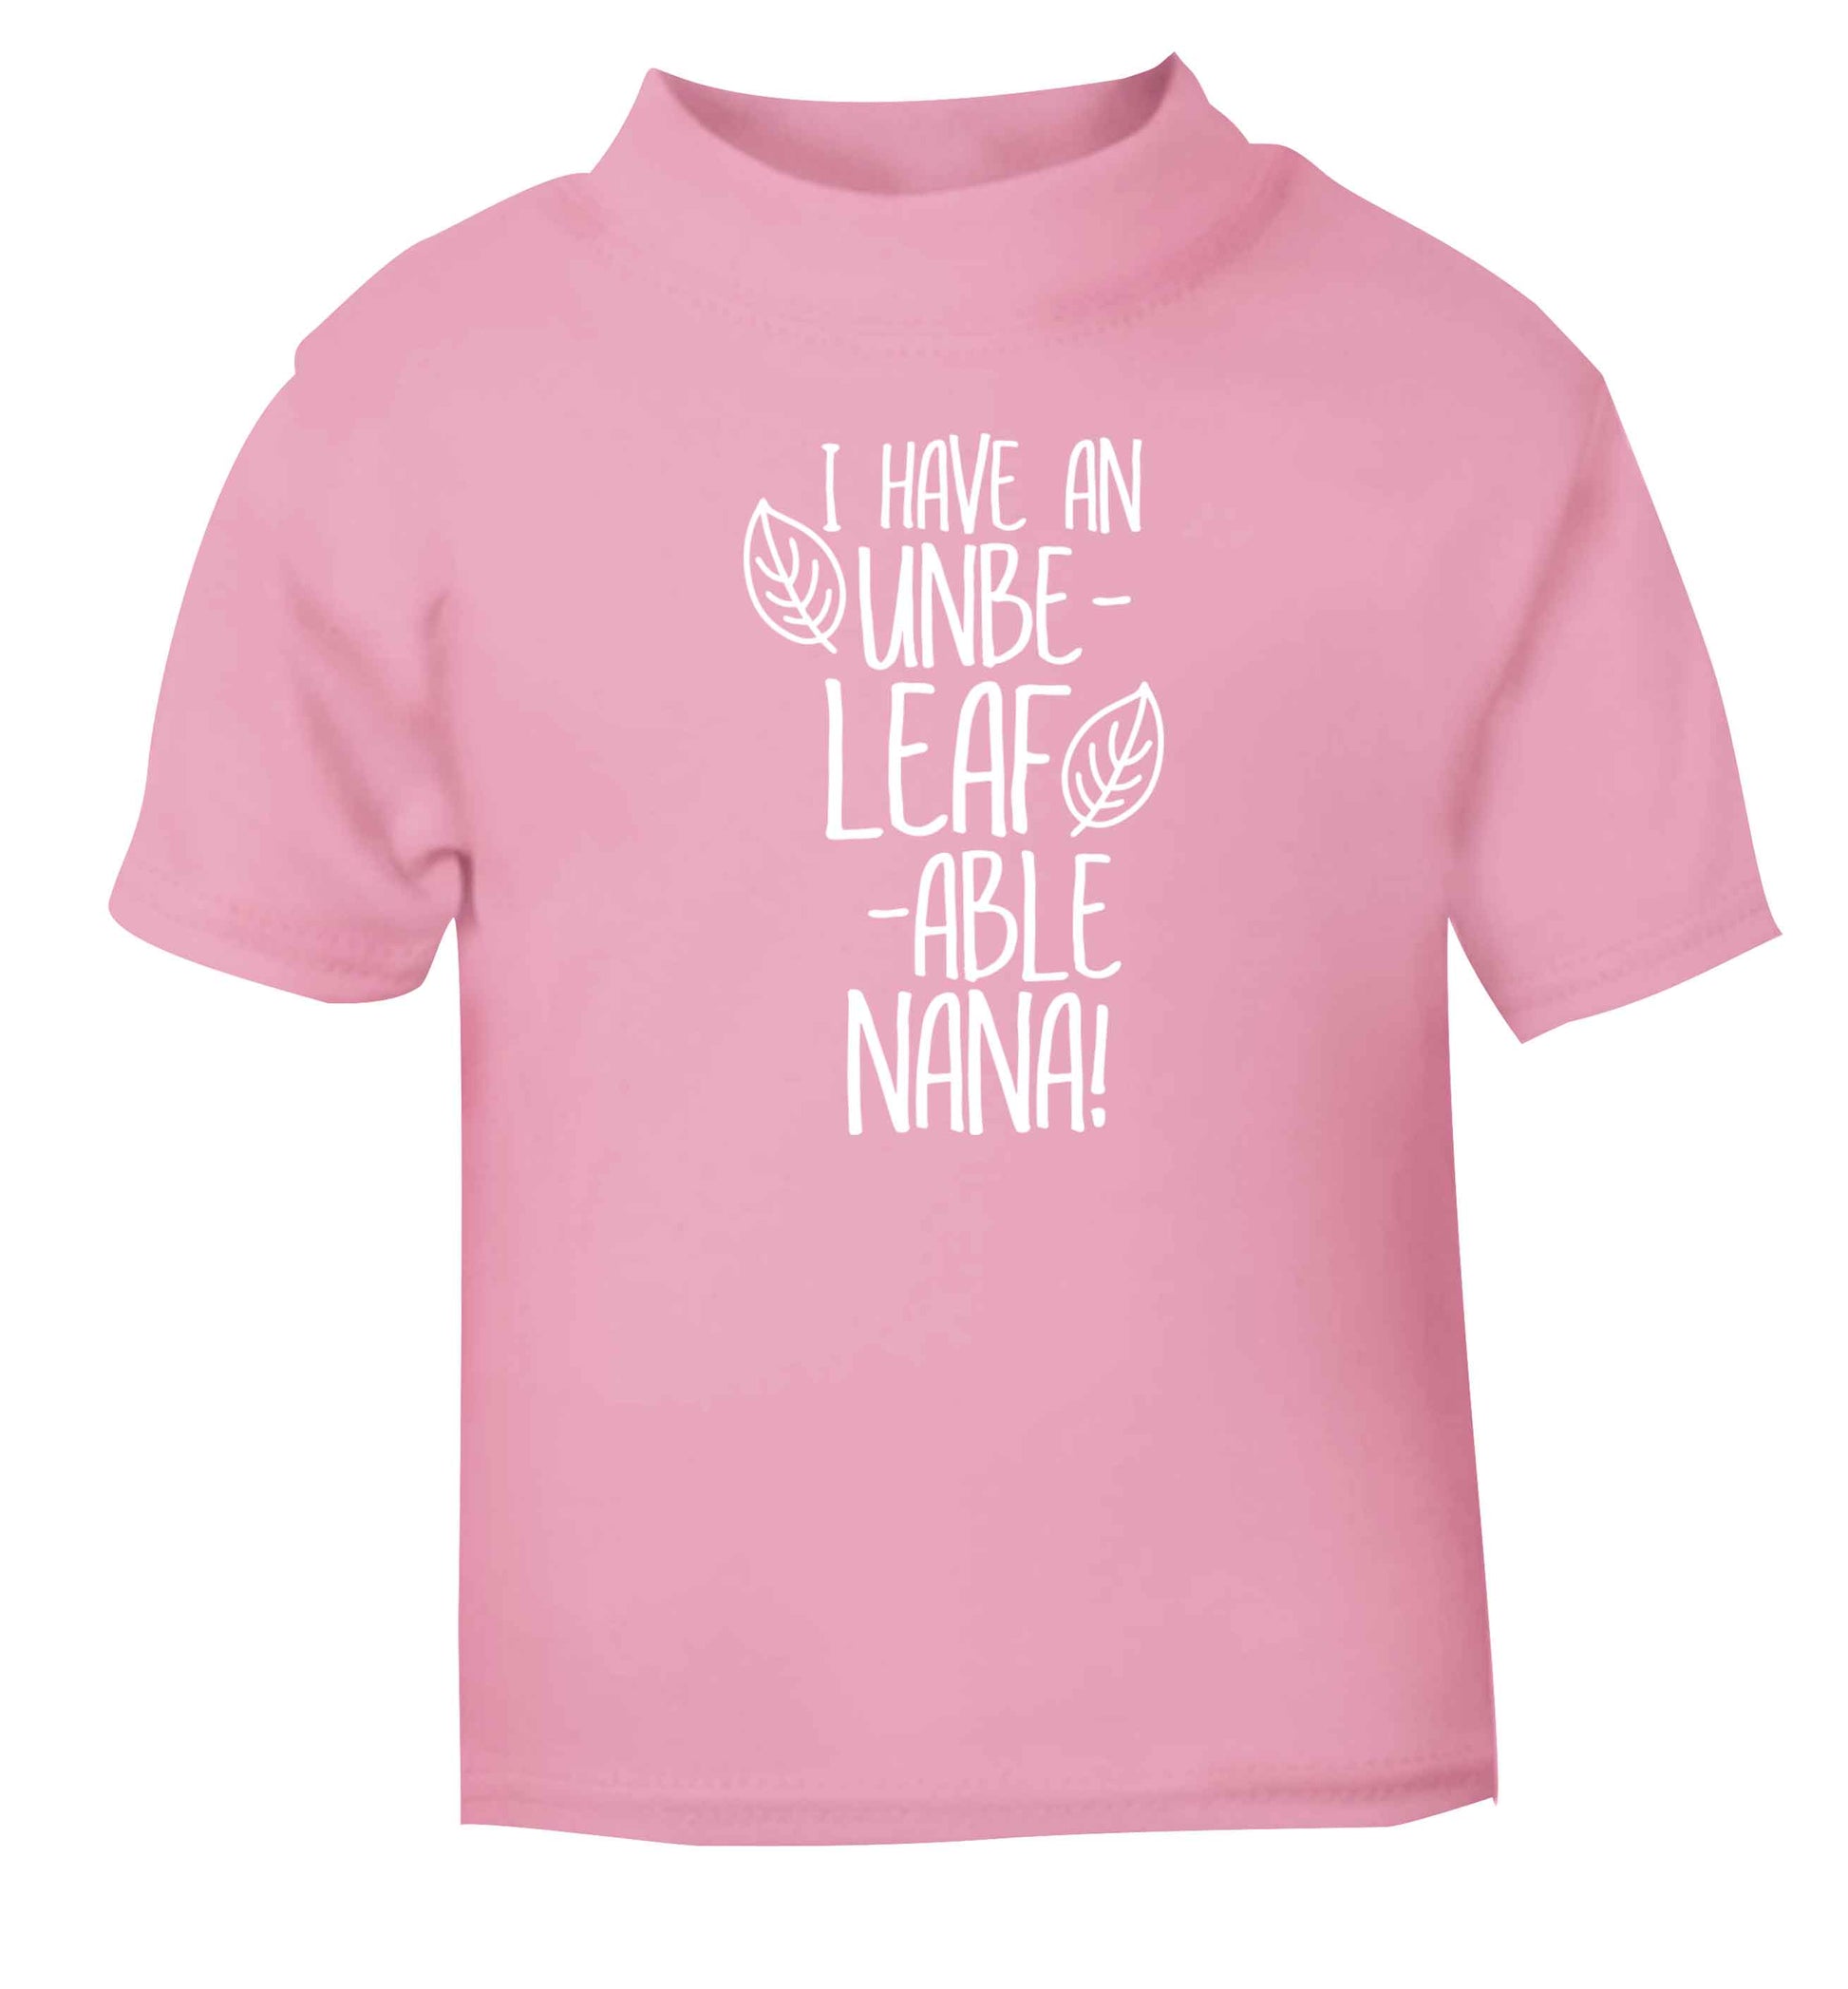 I have an unbe-leaf-able nana light pink Baby Toddler Tshirt 2 Years